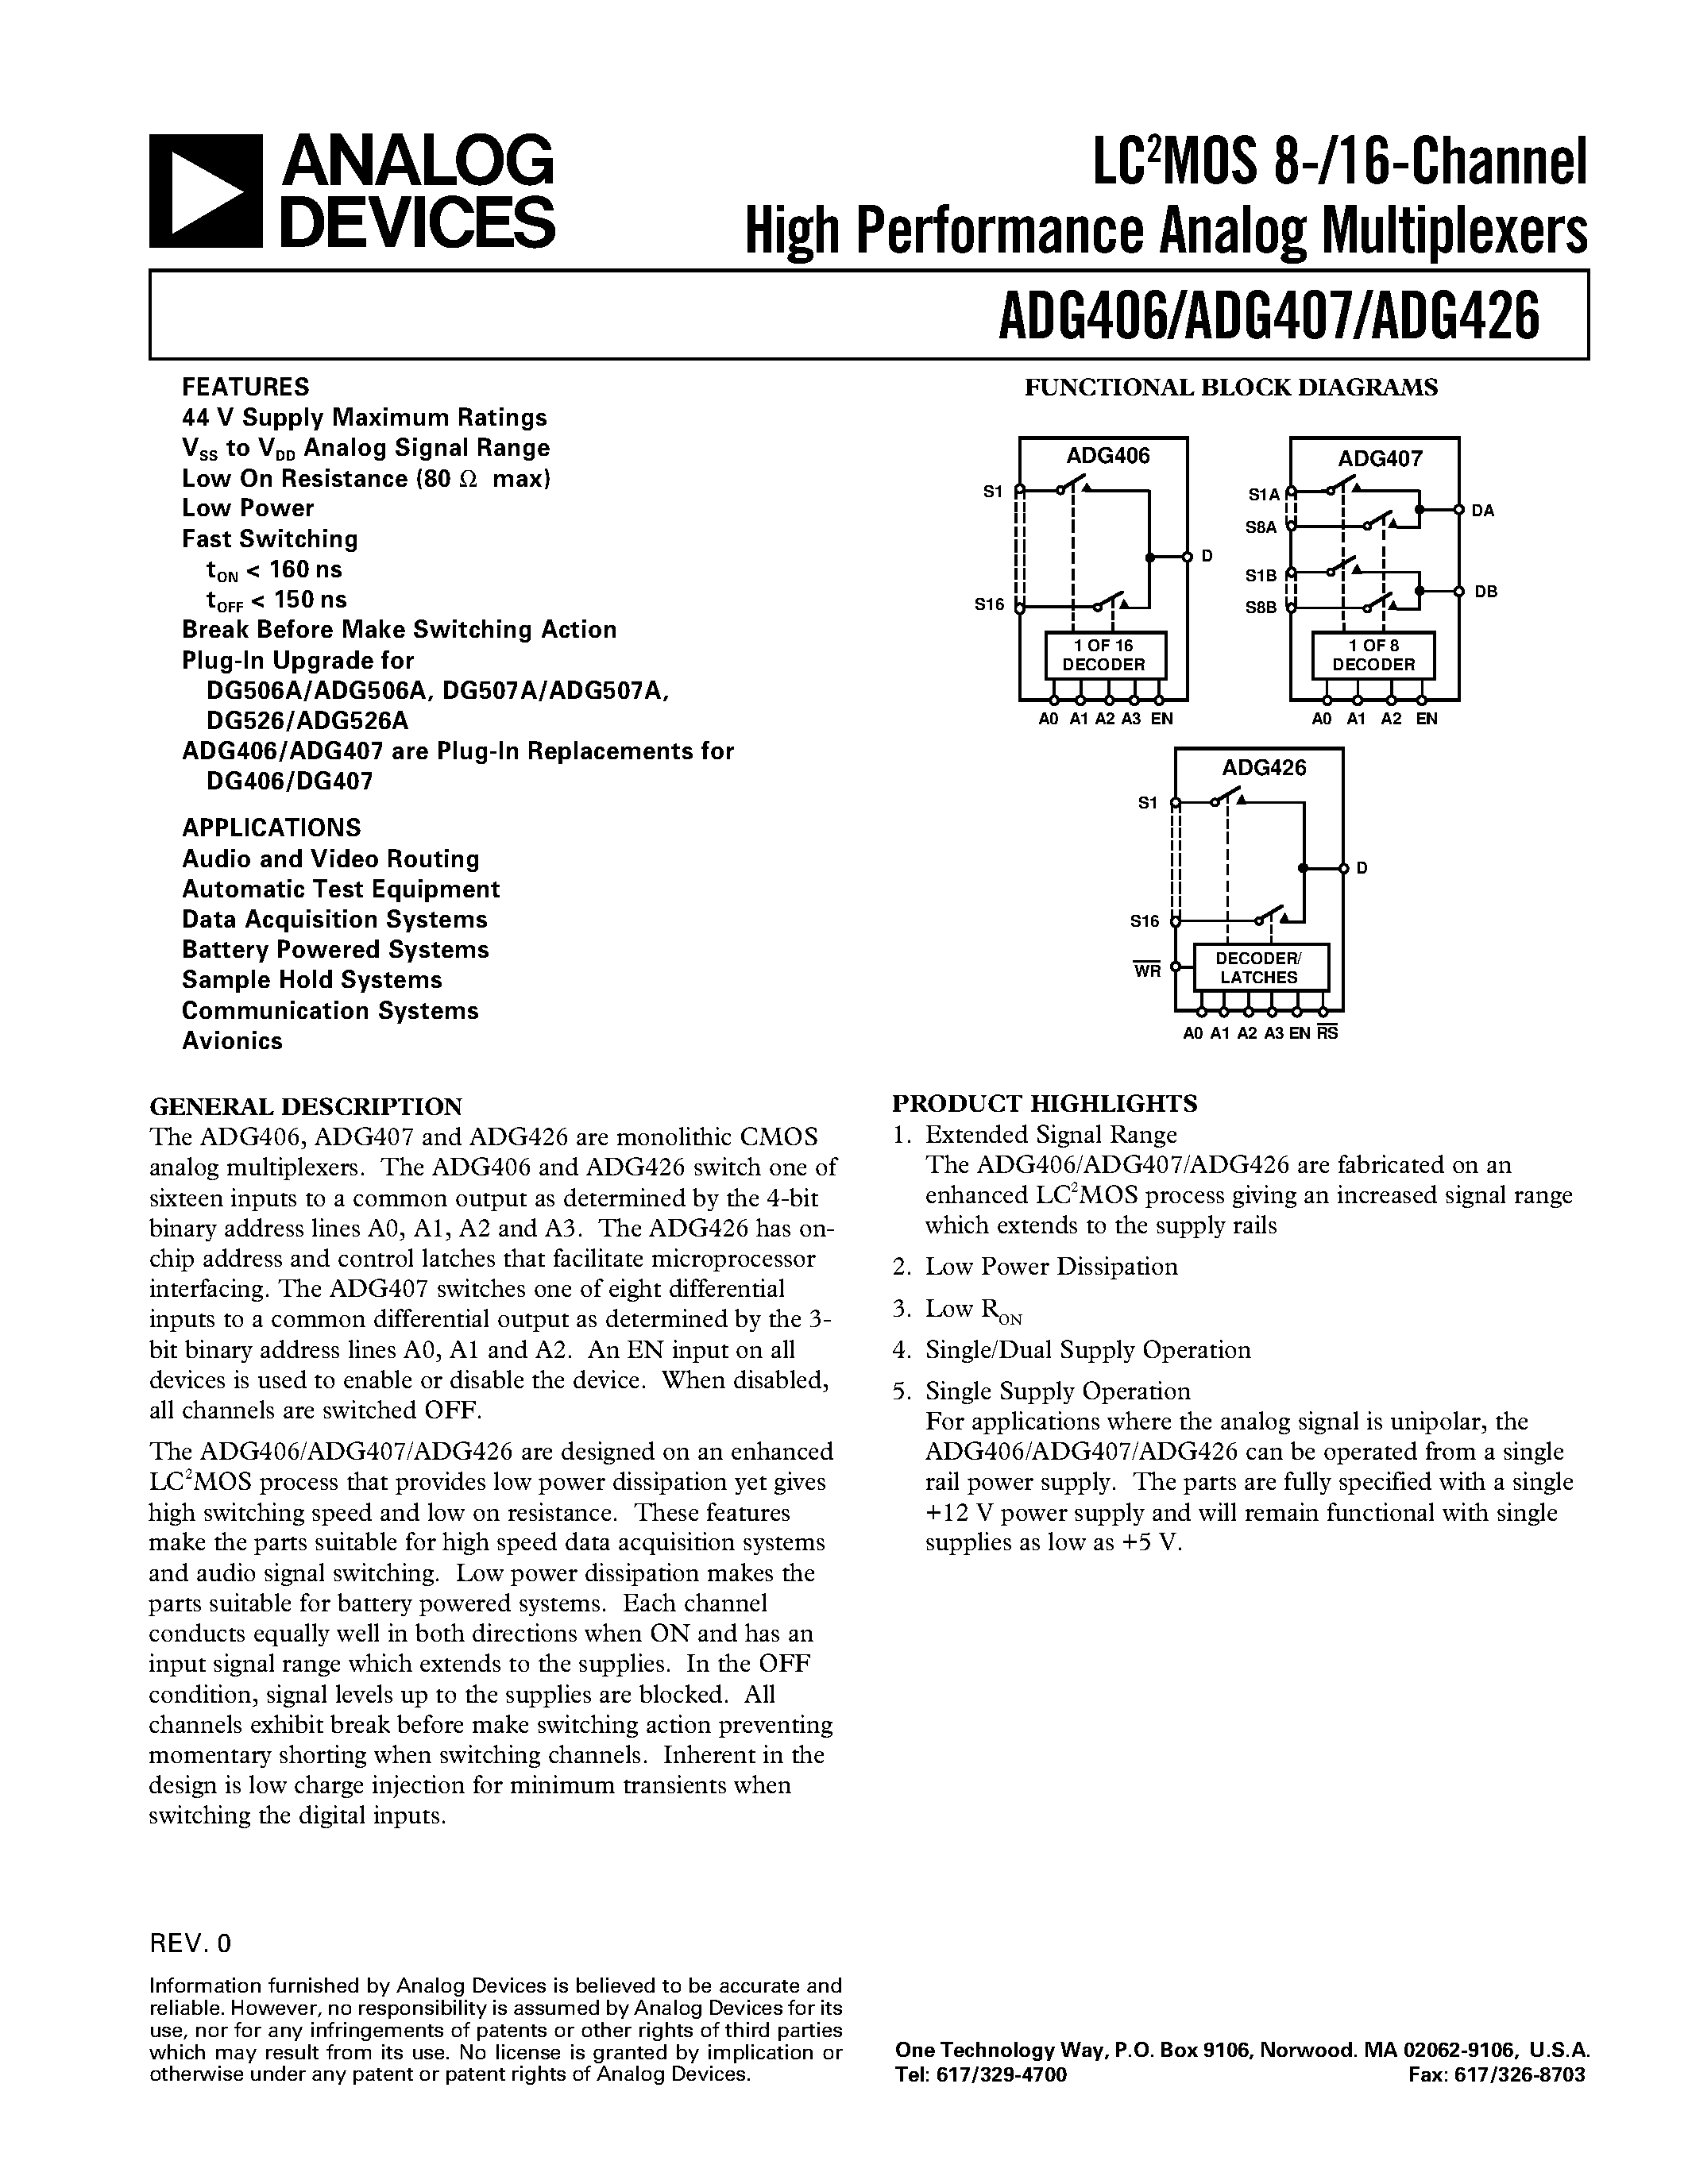 Datasheet ADG406 - LC2MOS 8-/16-Channel High Performance Analog Multiplexers page 1